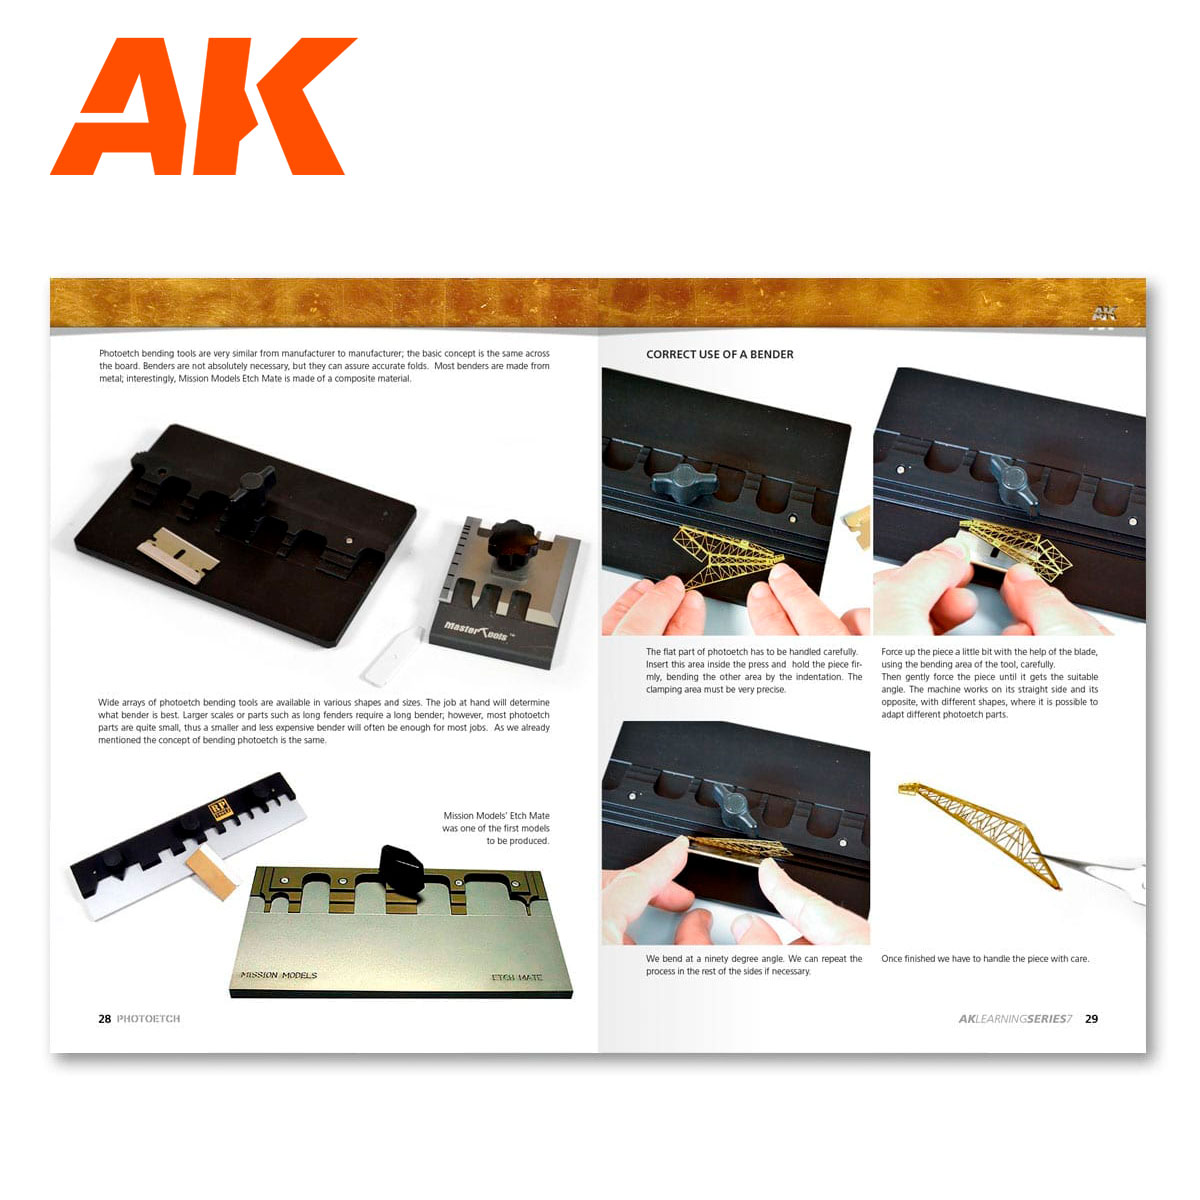 AK Learning Series: 07 - Photoetched Parts